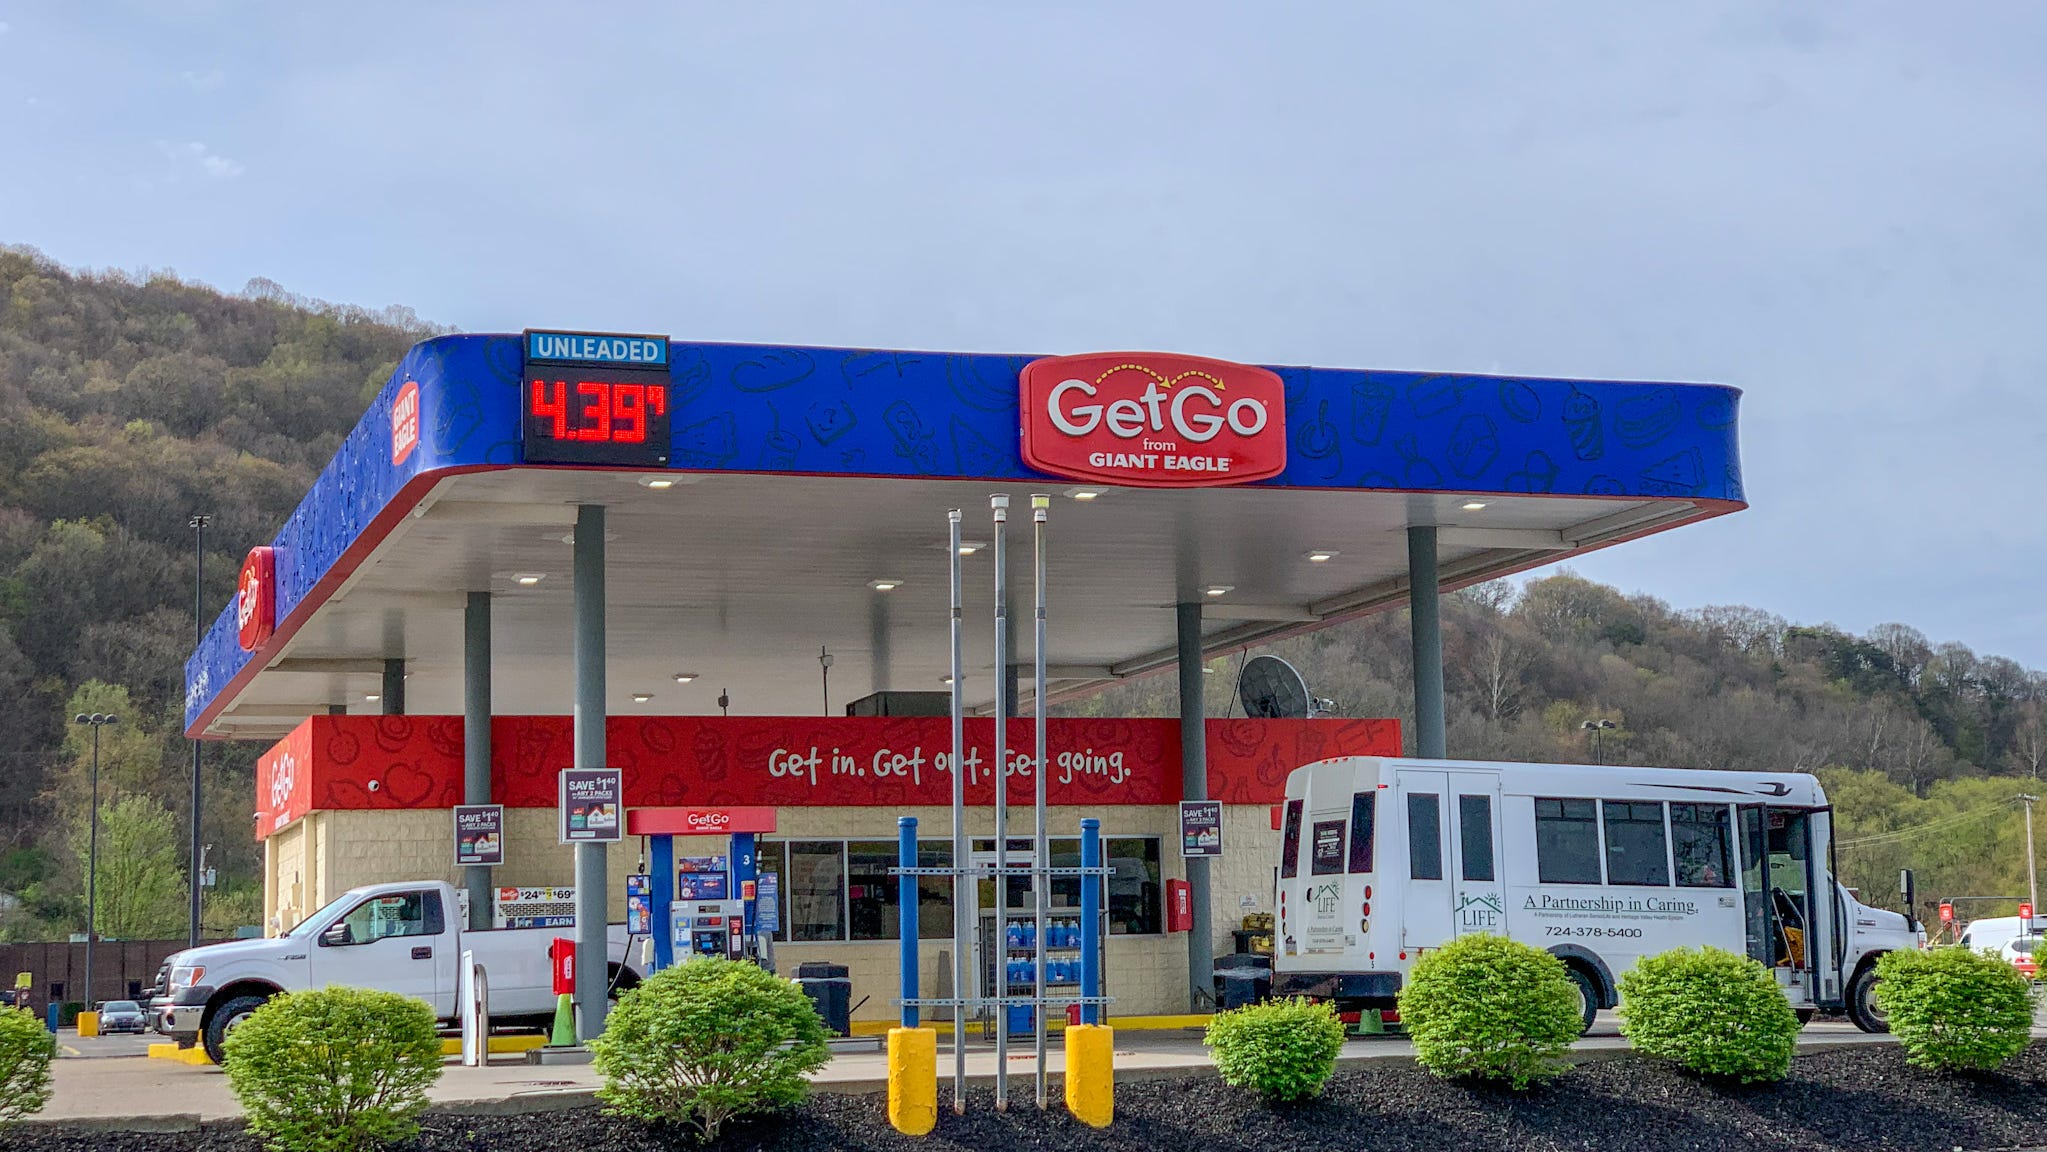 GetGo dropping price of all gas on Black Friday $-1.00  plus other BF deals. $1